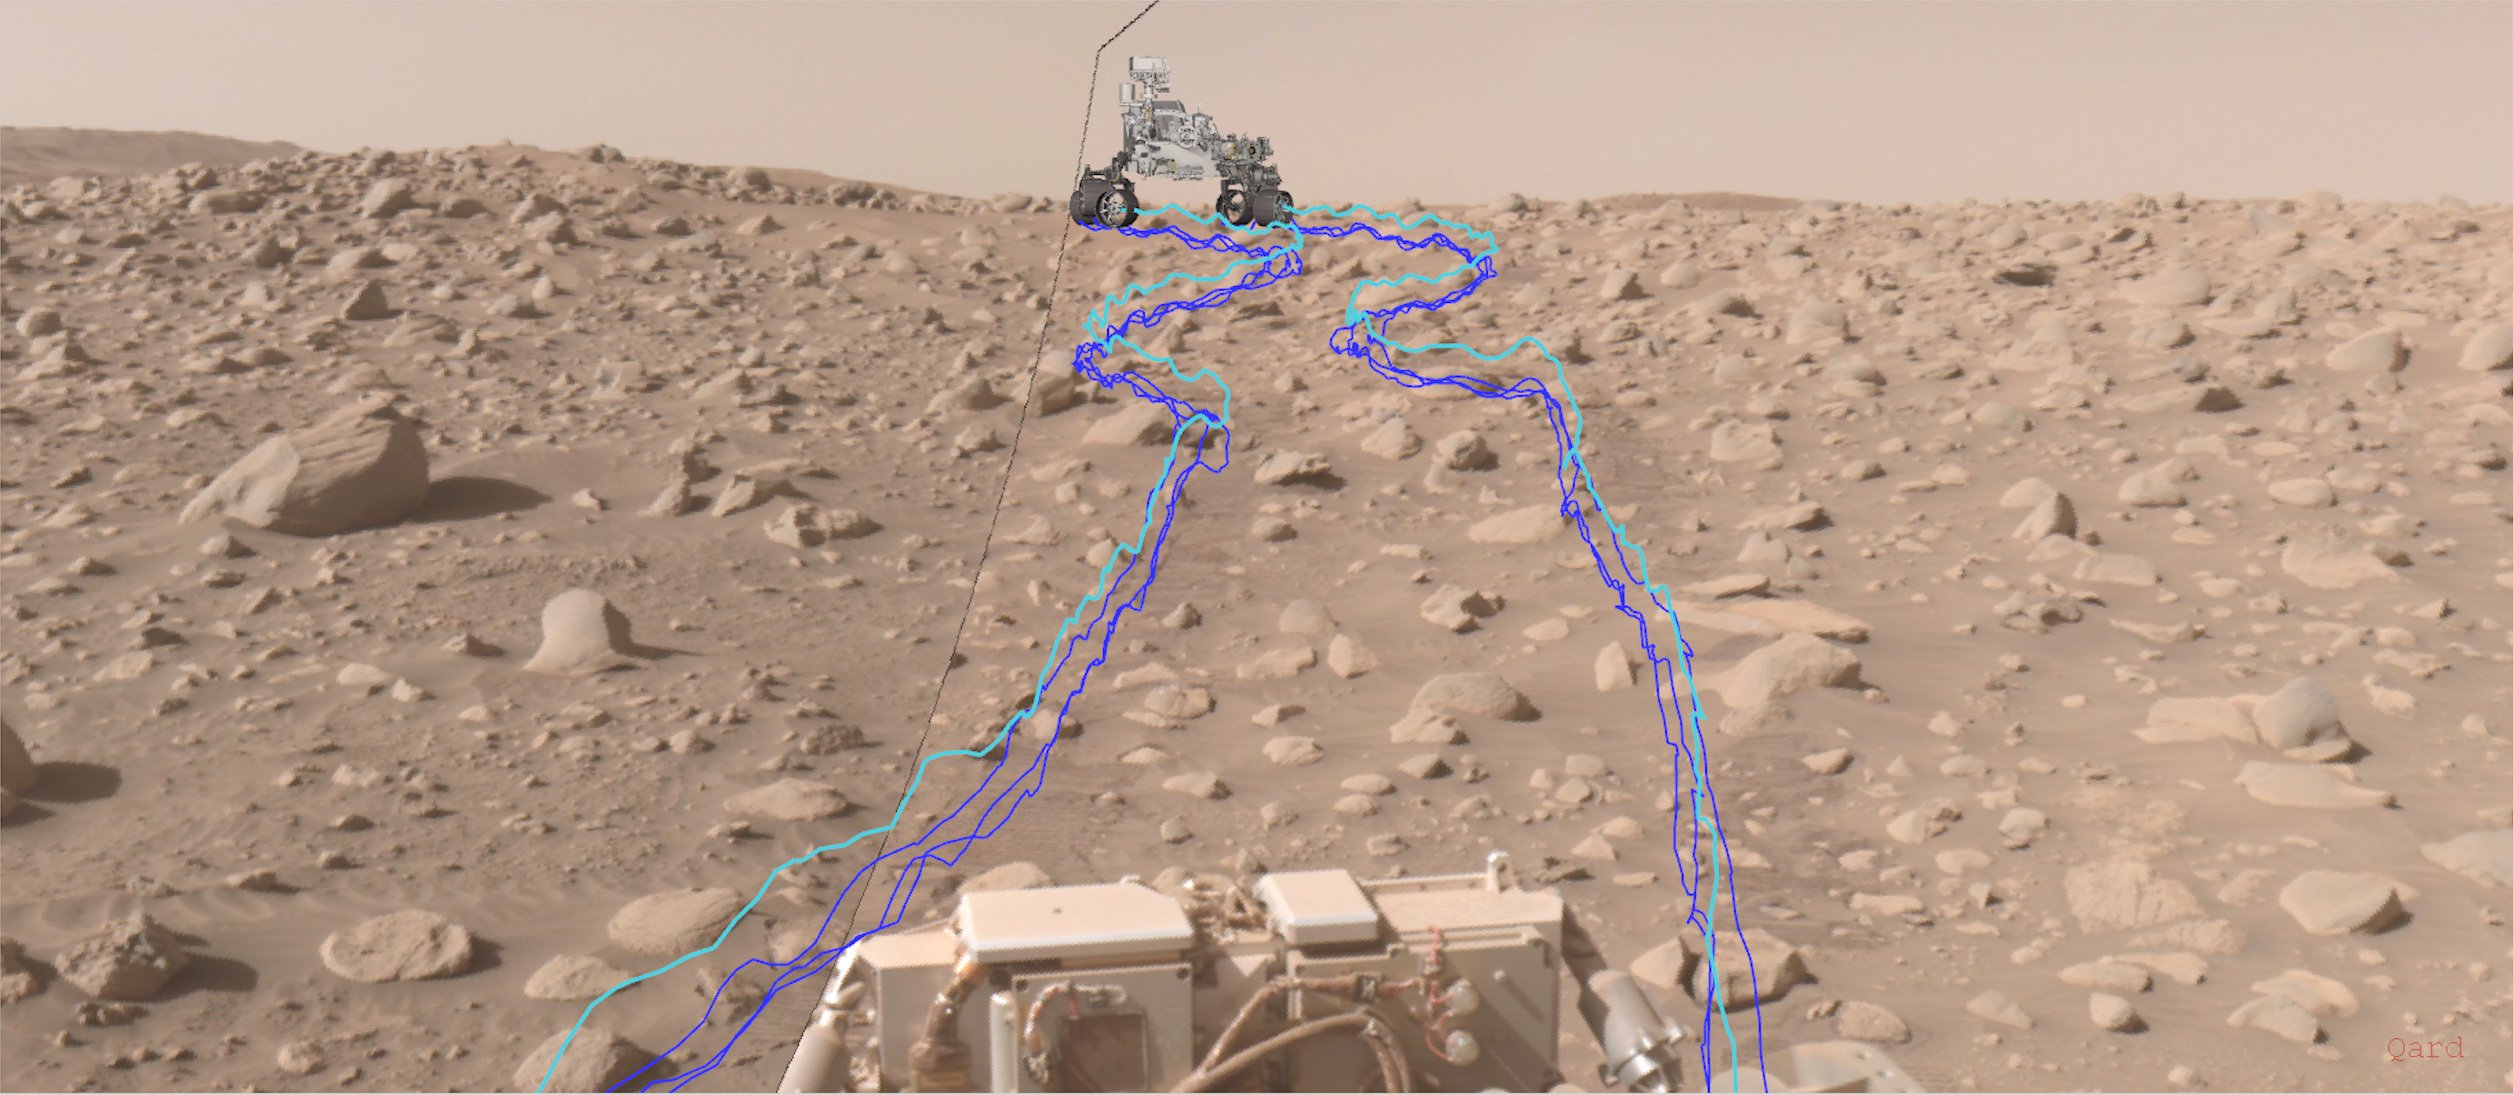 Demonstration of the AutoNav system on NASA's Mars Perseverance Rover as it helps map a safe route over Martian terrain.